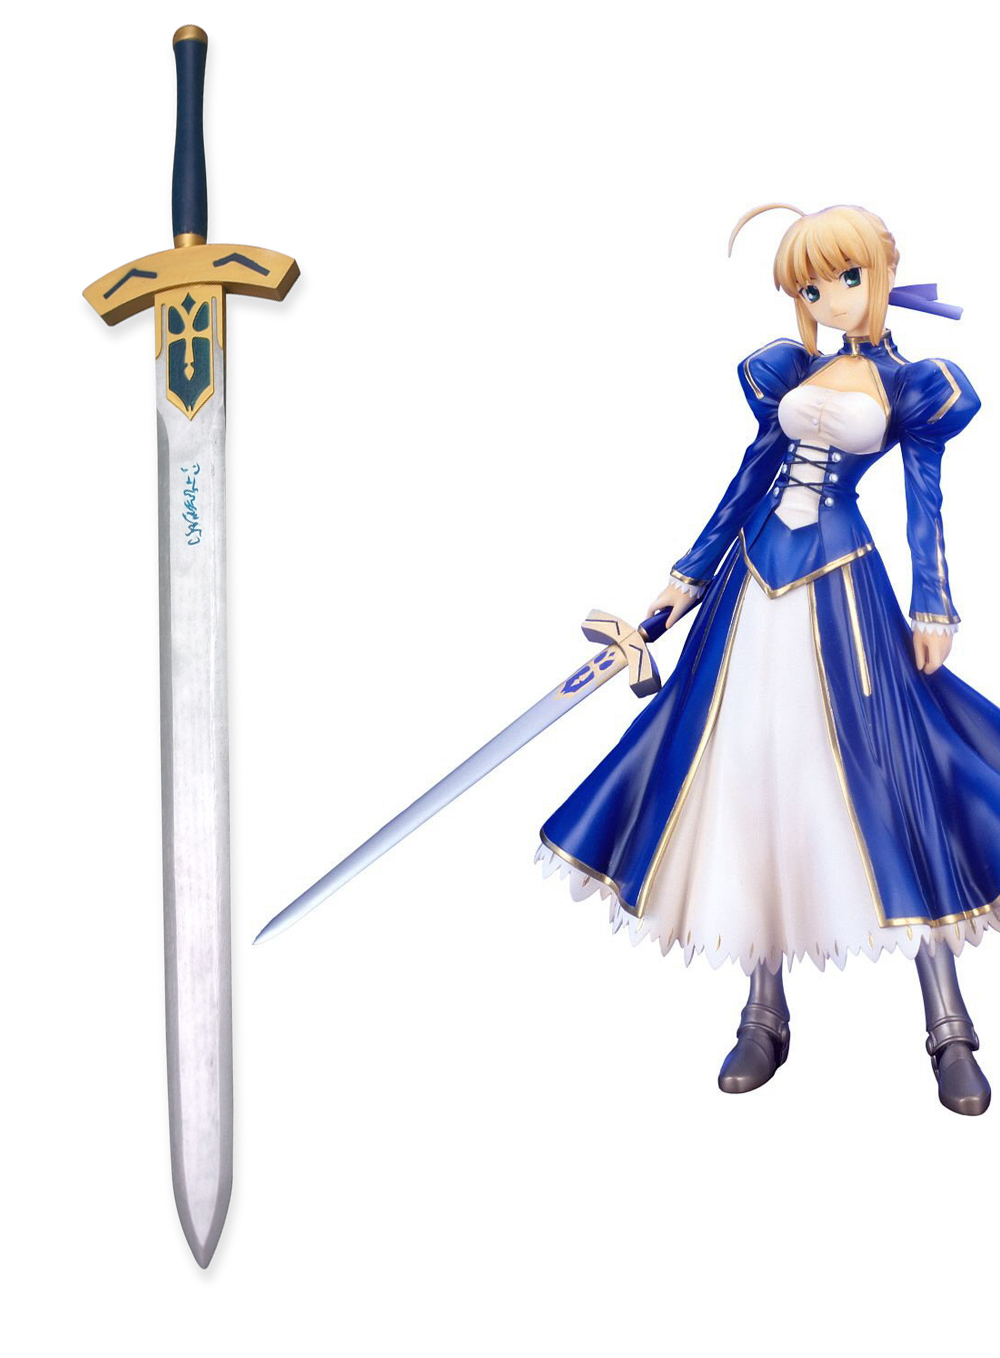 Fate stay night Saber Excalibur Cosplay Sword Wooden Weapons